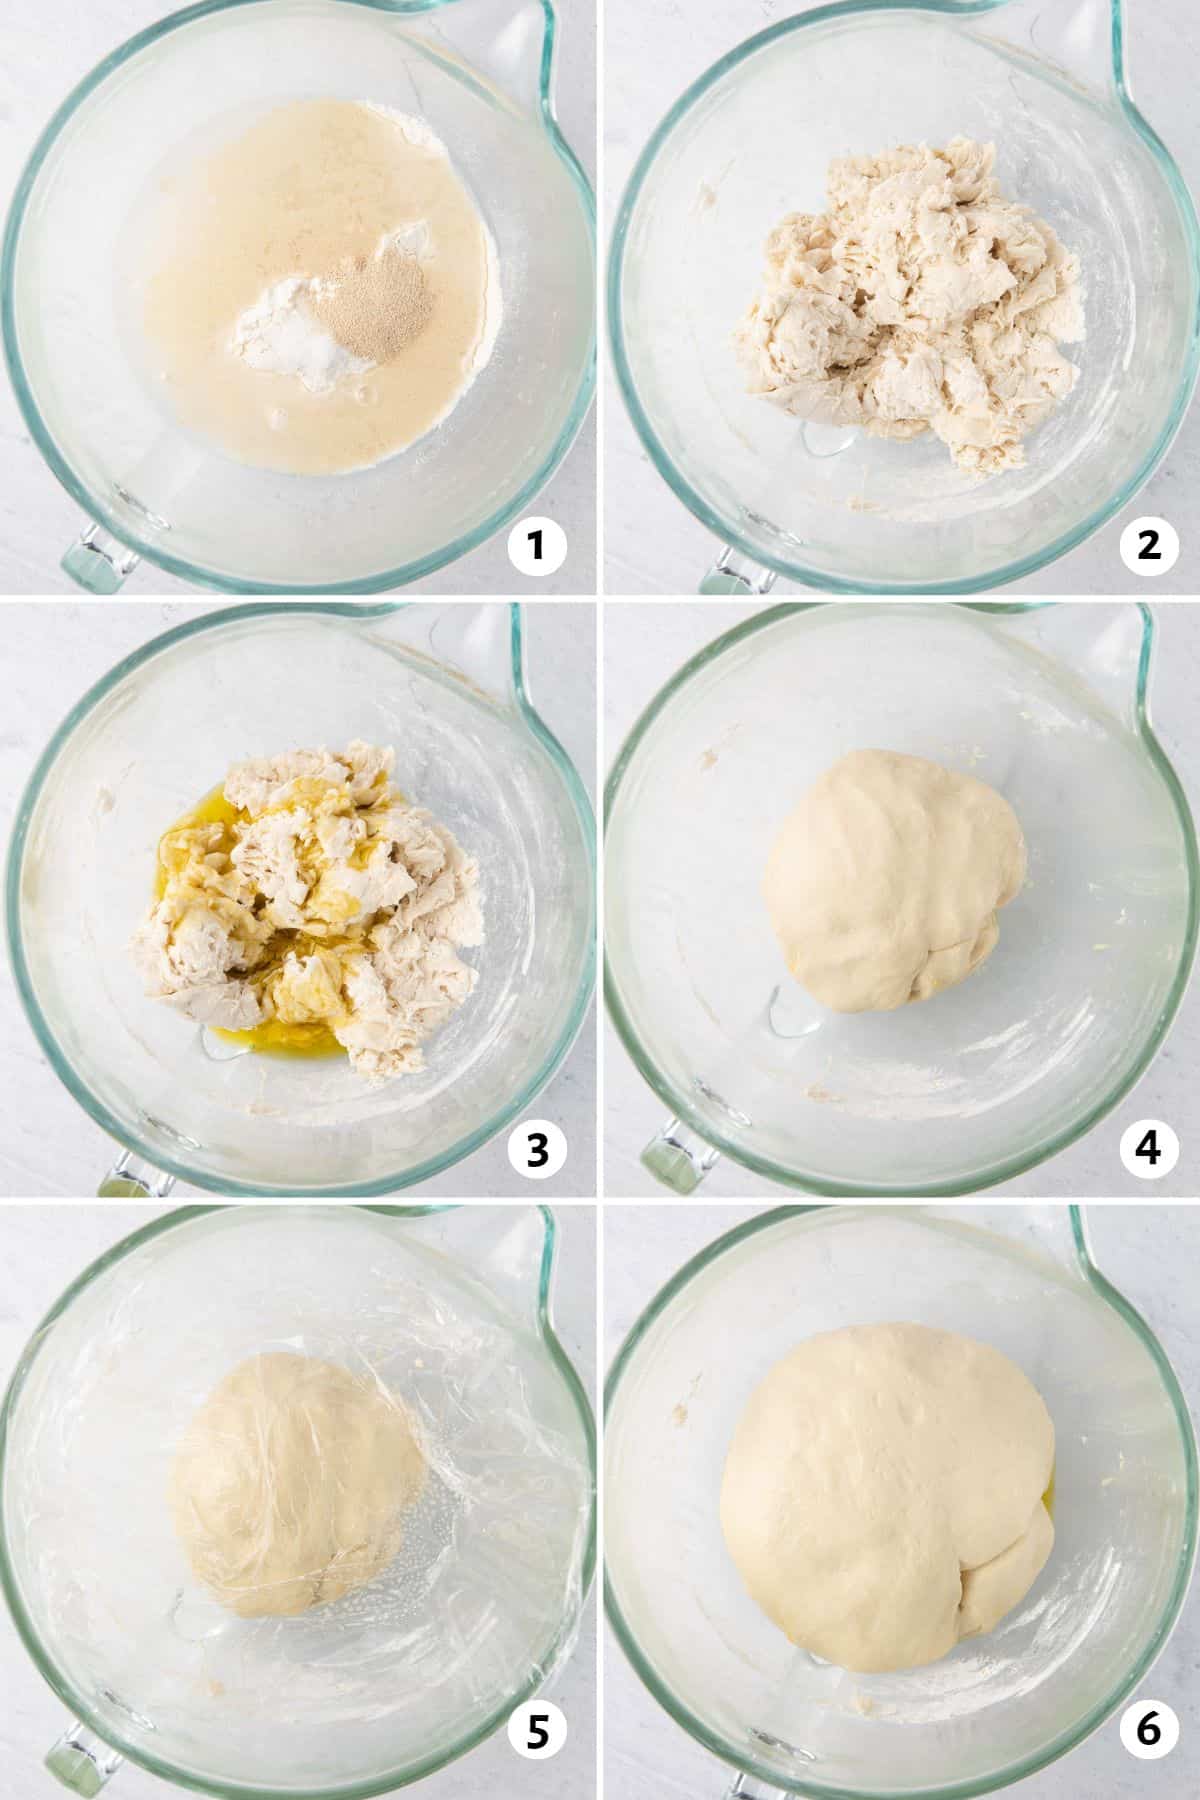 6 image collage making dough: 1- flour, water, yeast, and salt in a stand mixer bowl before mixing, 2- dough after initial mix to show a shaggy mixture, 3- oil added on top, 4- after dough has formed into a smooth, springy ball, 5- oiled plastic wrap set on top of dough ball in stand mixer bowl, 6- dough after doubling its volume in the bowl with plastic wrap removed.